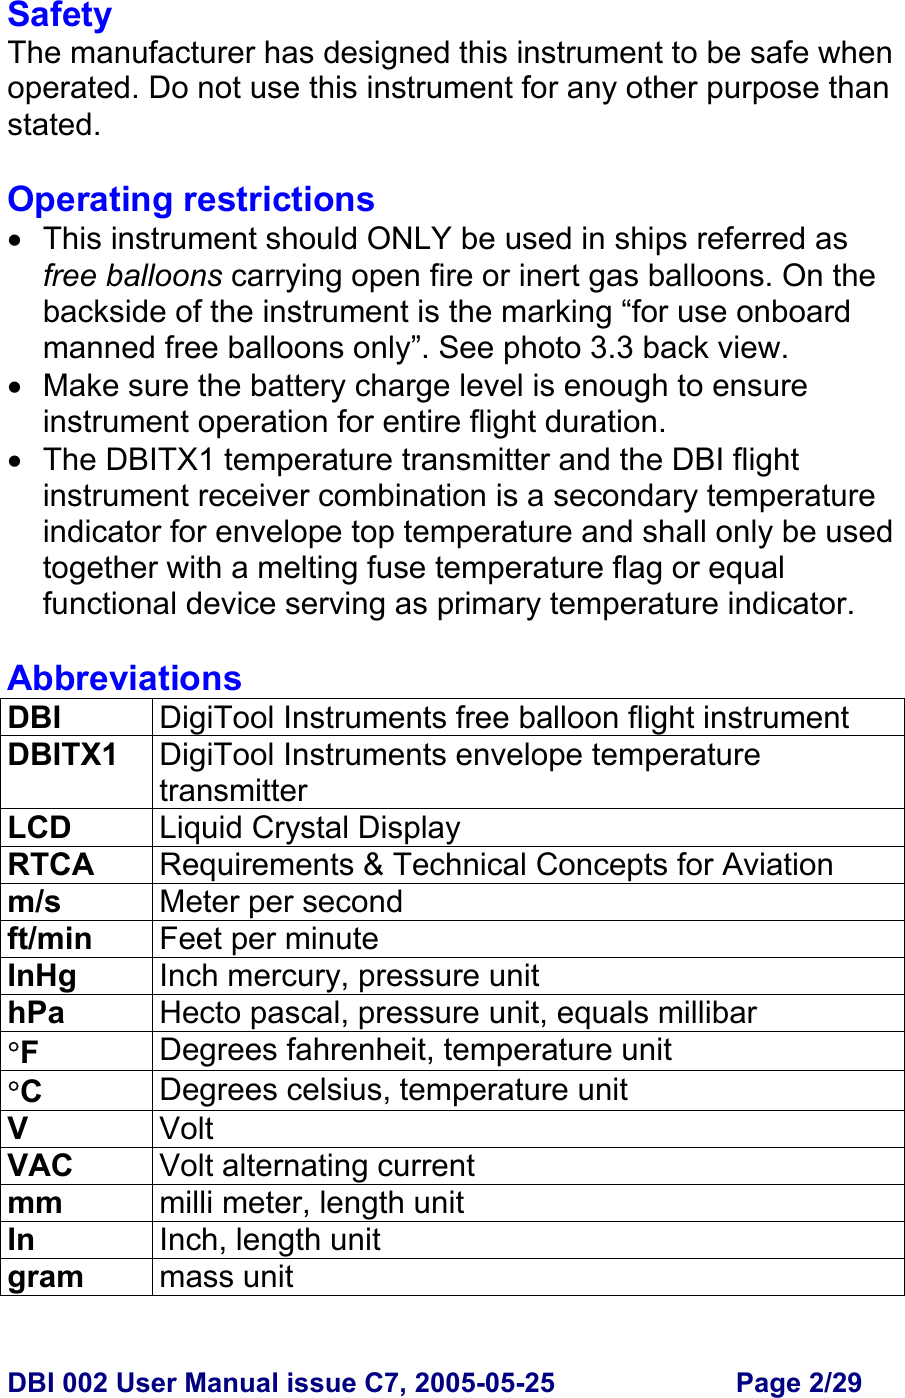  DBI 002 User Manual issue C7, 2005-05-25  Page 2/29  Safety The manufacturer has designed this instrument to be safe when operated. Do not use this instrument for any other purpose than stated.   Operating restrictions •  This instrument should ONLY be used in ships referred as free balloons carrying open fire or inert gas balloons. On the backside of the instrument is the marking “for use onboard manned free balloons only”. See photo 3.3 back view. • Make sure the battery charge level is enough to ensure instrument operation for entire flight duration. • The DBITX1 temperature transmitter and the DBI flight instrument receiver combination is a secondary temperature indicator for envelope top temperature and shall only be used together with a melting fuse temperature flag or equal functional device serving as primary temperature indicator.  Abbreviations DBI  DigiTool Instruments free balloon flight instrument  DBITX1  DigiTool Instruments envelope temperature transmitter LCD  Liquid Crystal Display RTCA  Requirements &amp; Technical Concepts for Aviation m/s  Meter per second ft/min  Feet per minute InHg  Inch mercury, pressure unit hPa  Hecto pascal, pressure unit, equals millibar °F  Degrees fahrenheit, temperature unit °C  Degrees celsius, temperature unit V  Volt VAC  Volt alternating current mm  milli meter, length unit In  Inch, length unit gram  mass unit 